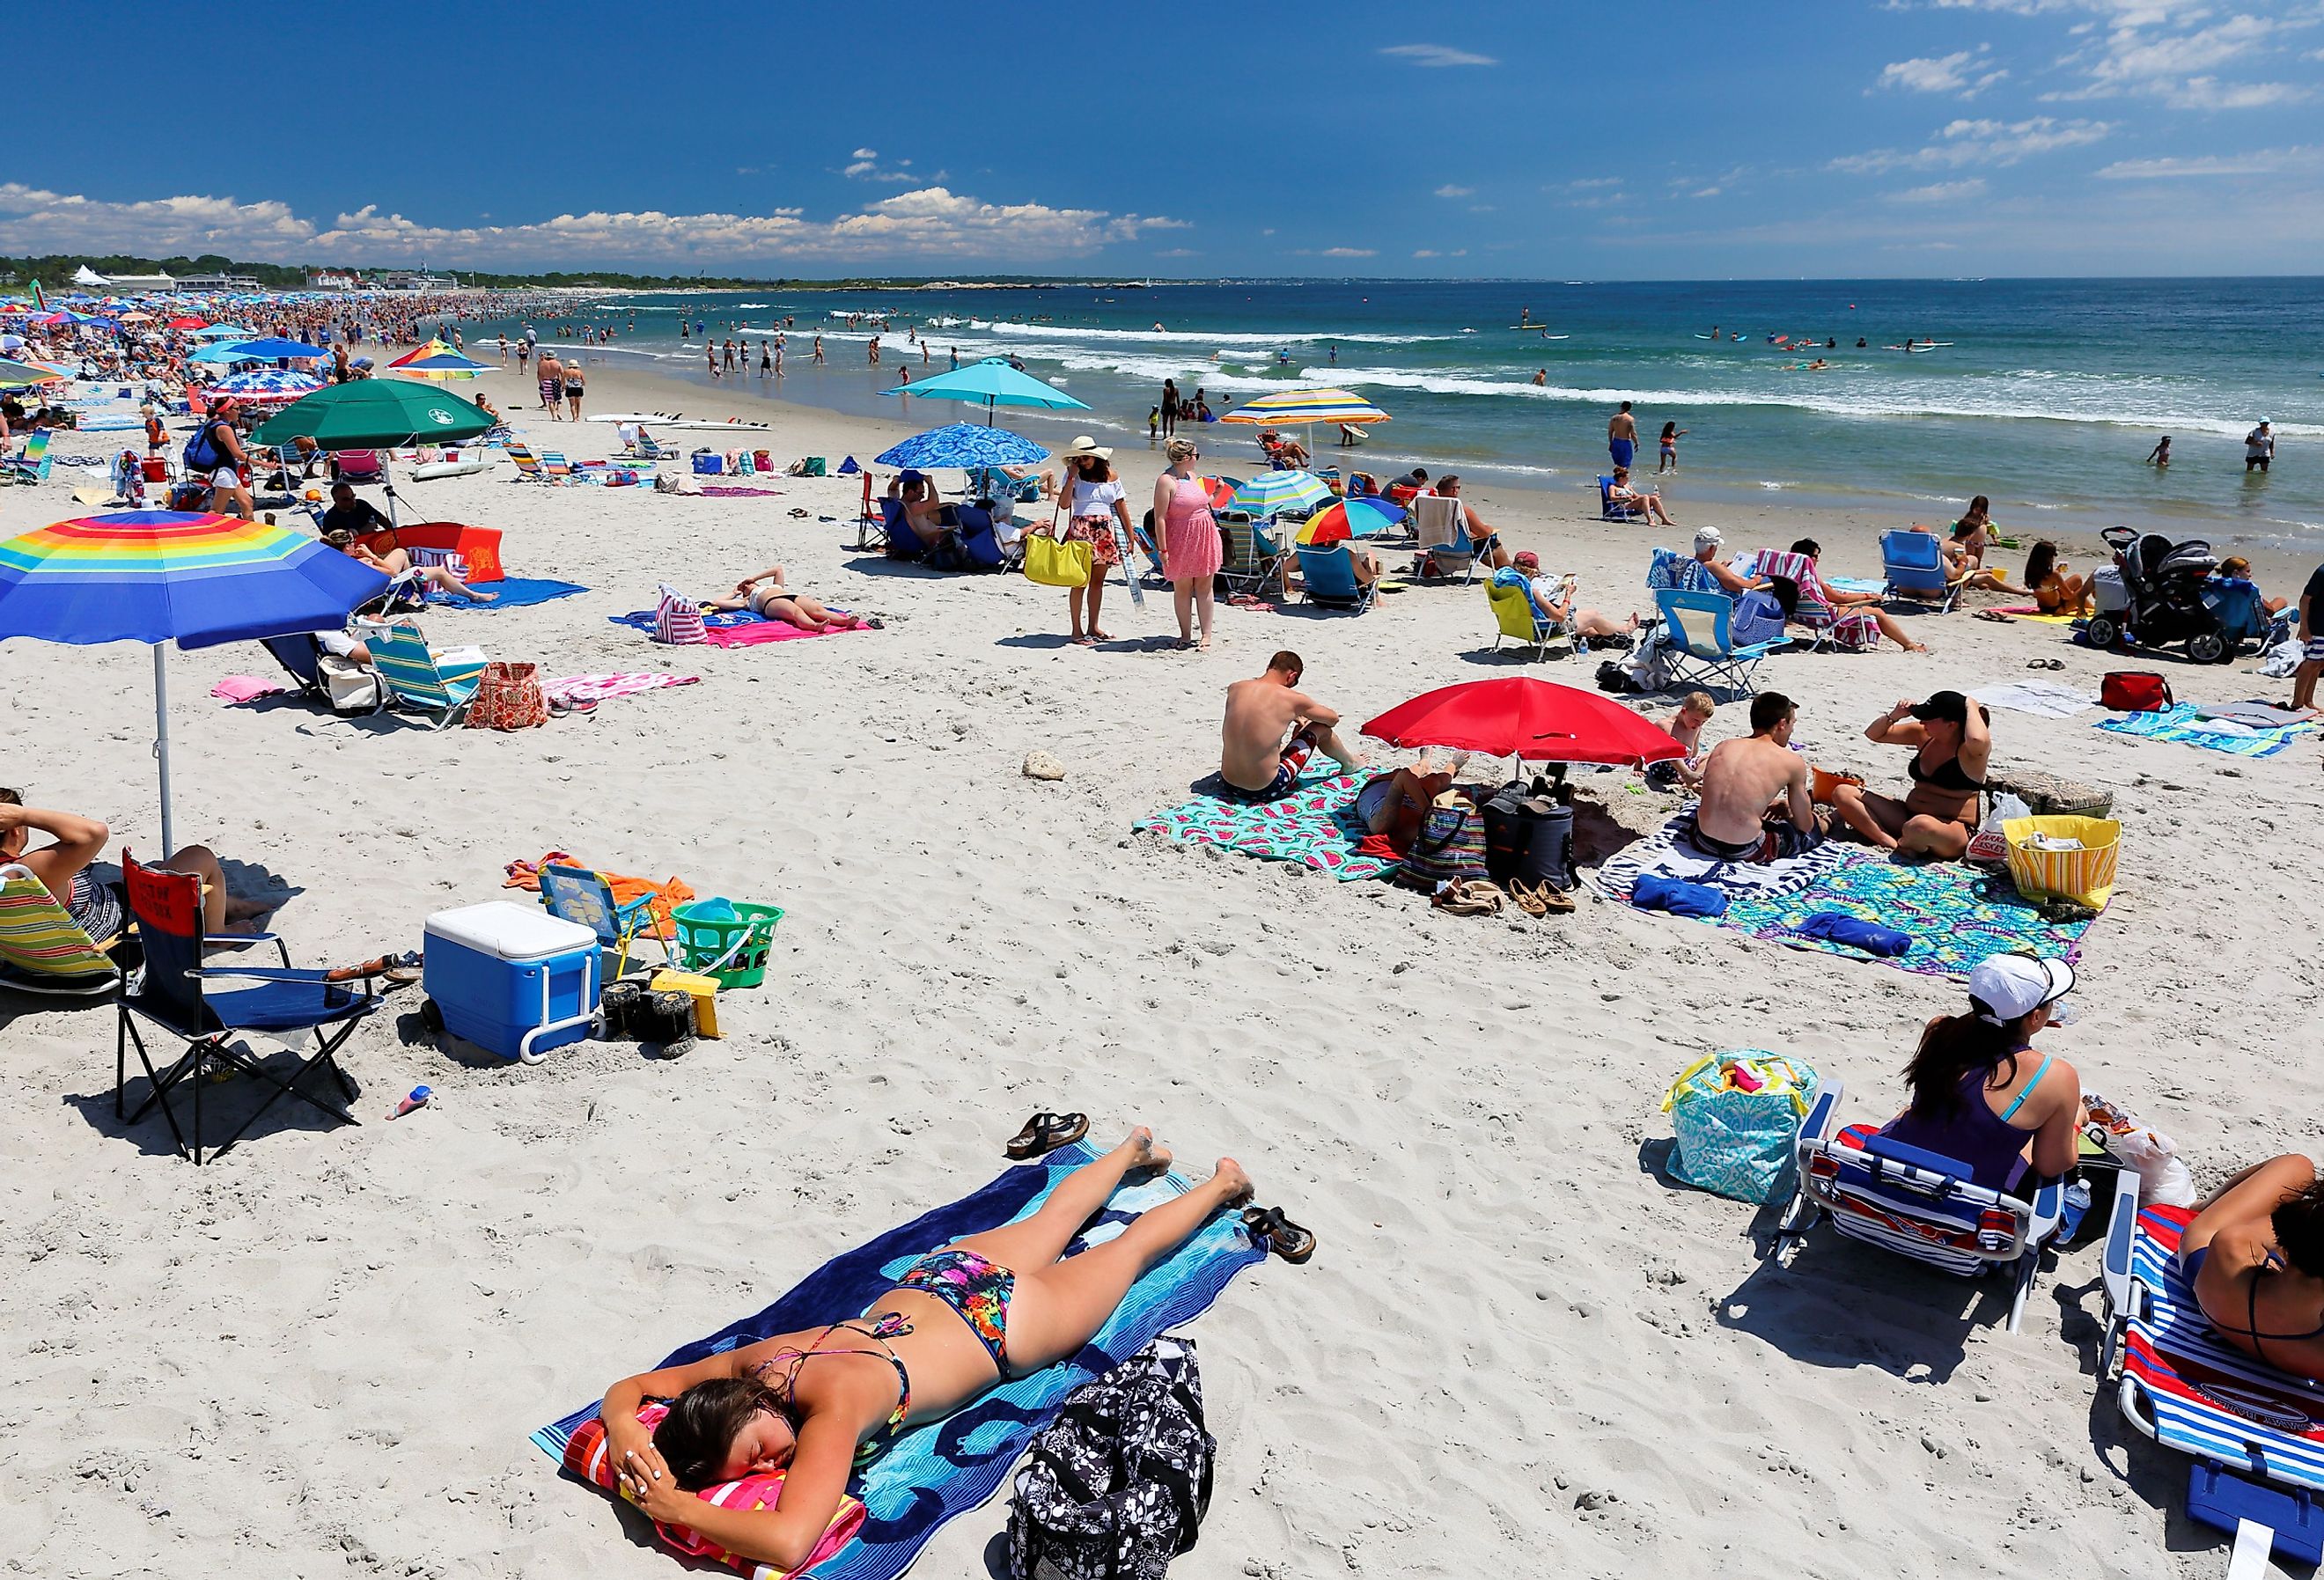 People relaxing at Narragansett Town Beach on a sunny day. Image credit Jay Yuan via Shutterstock